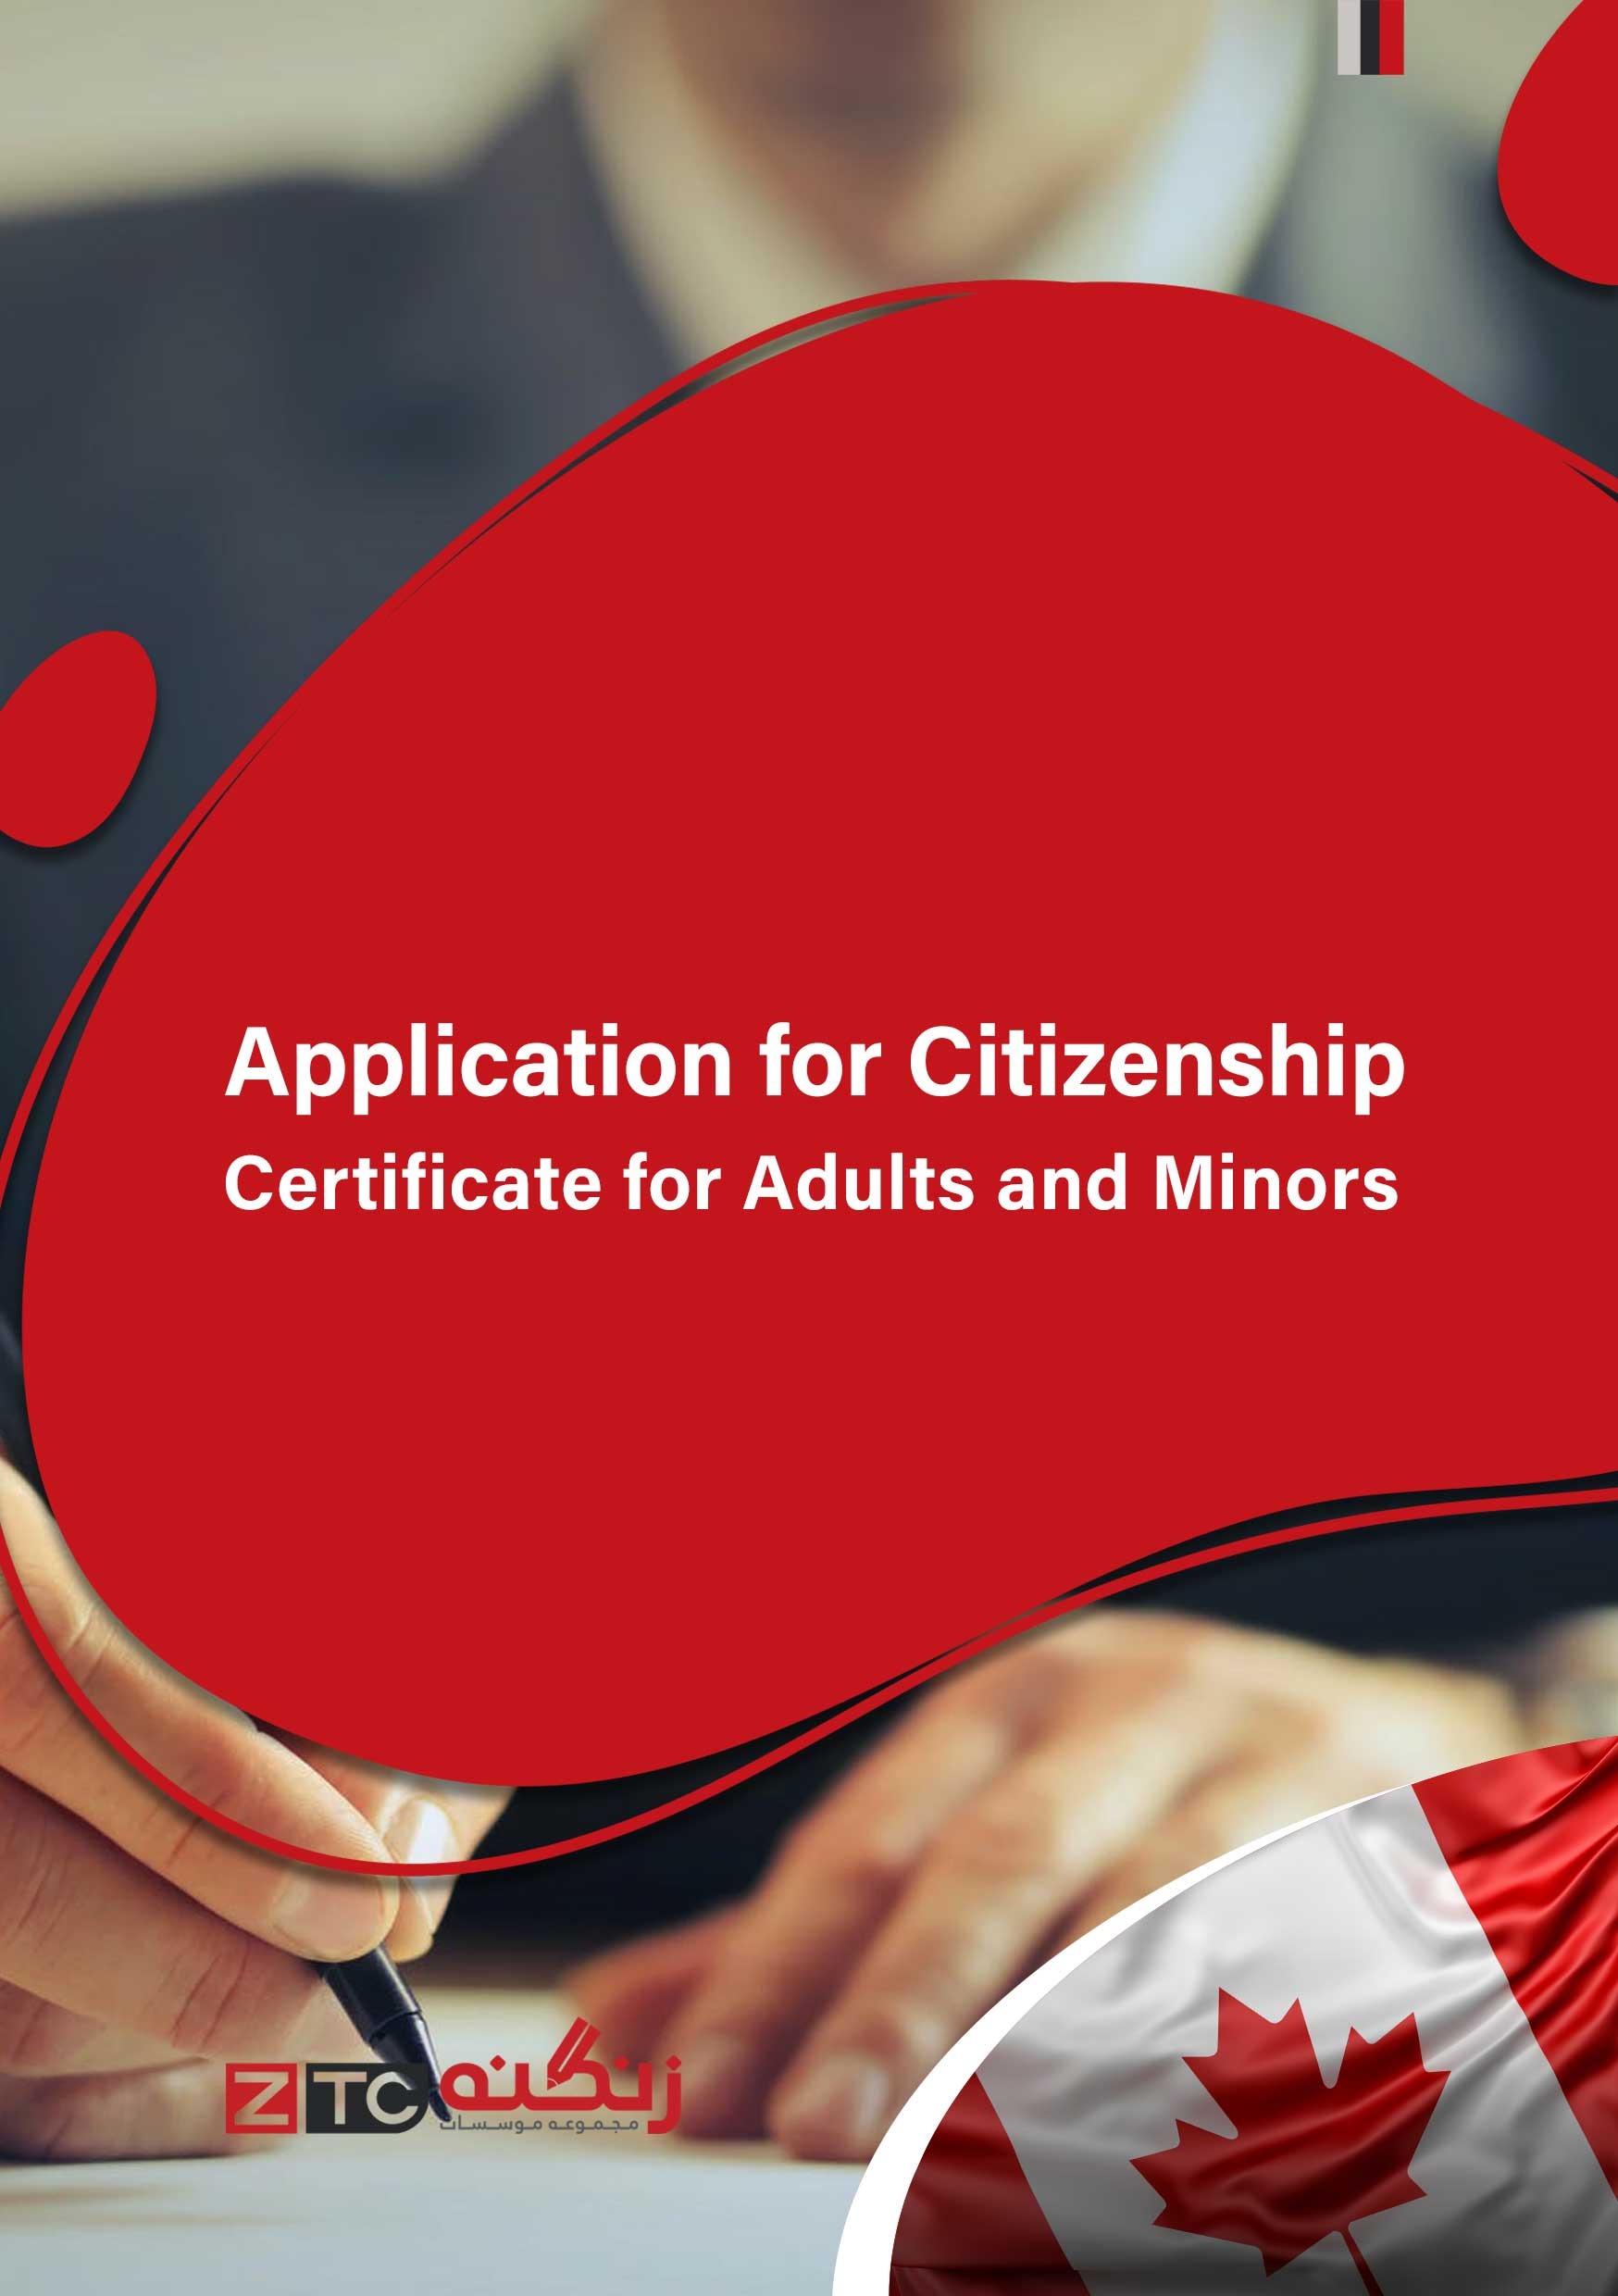 Application for Citizenship Certificate for Adults and Minors